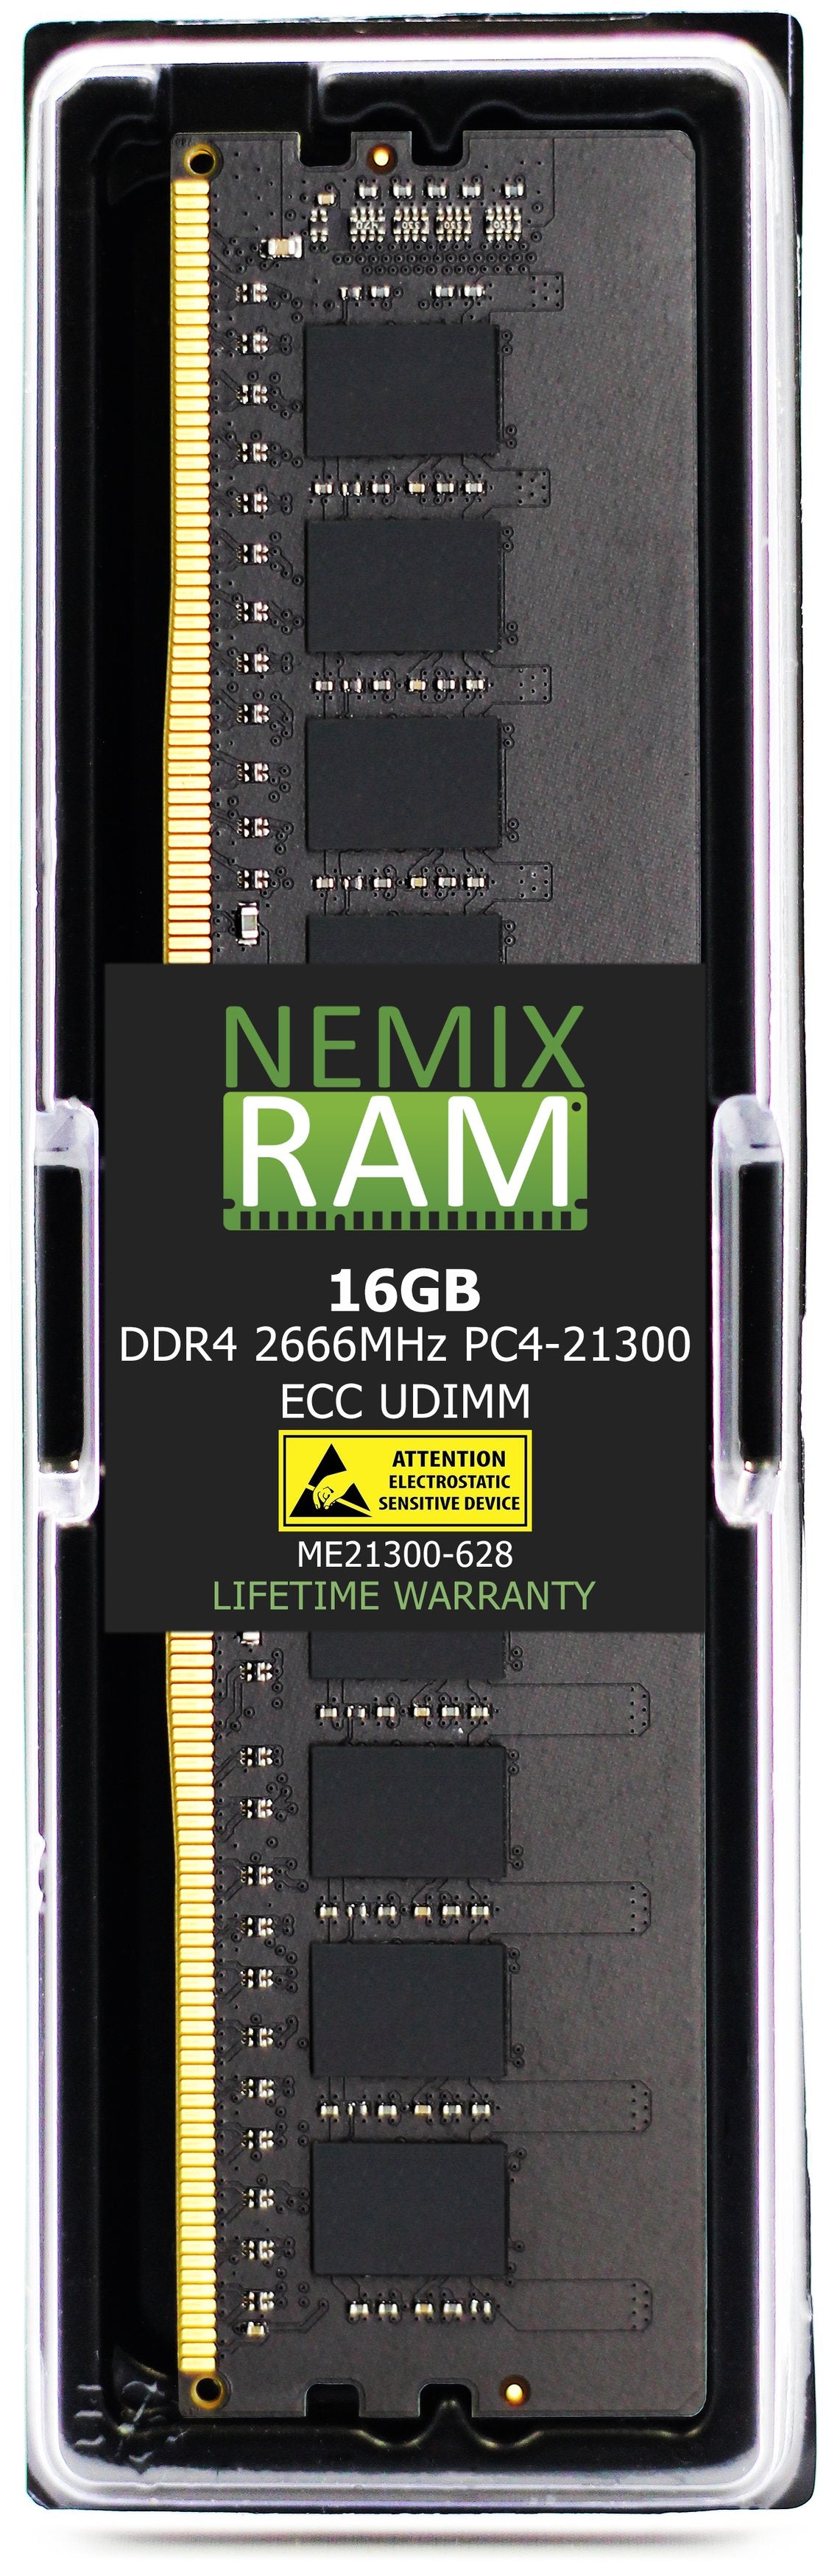 DDR4 2666MHZ PC4-21300 ECC UDIMM Compatible with Synology RackStation RS2421+/RS2421RP+